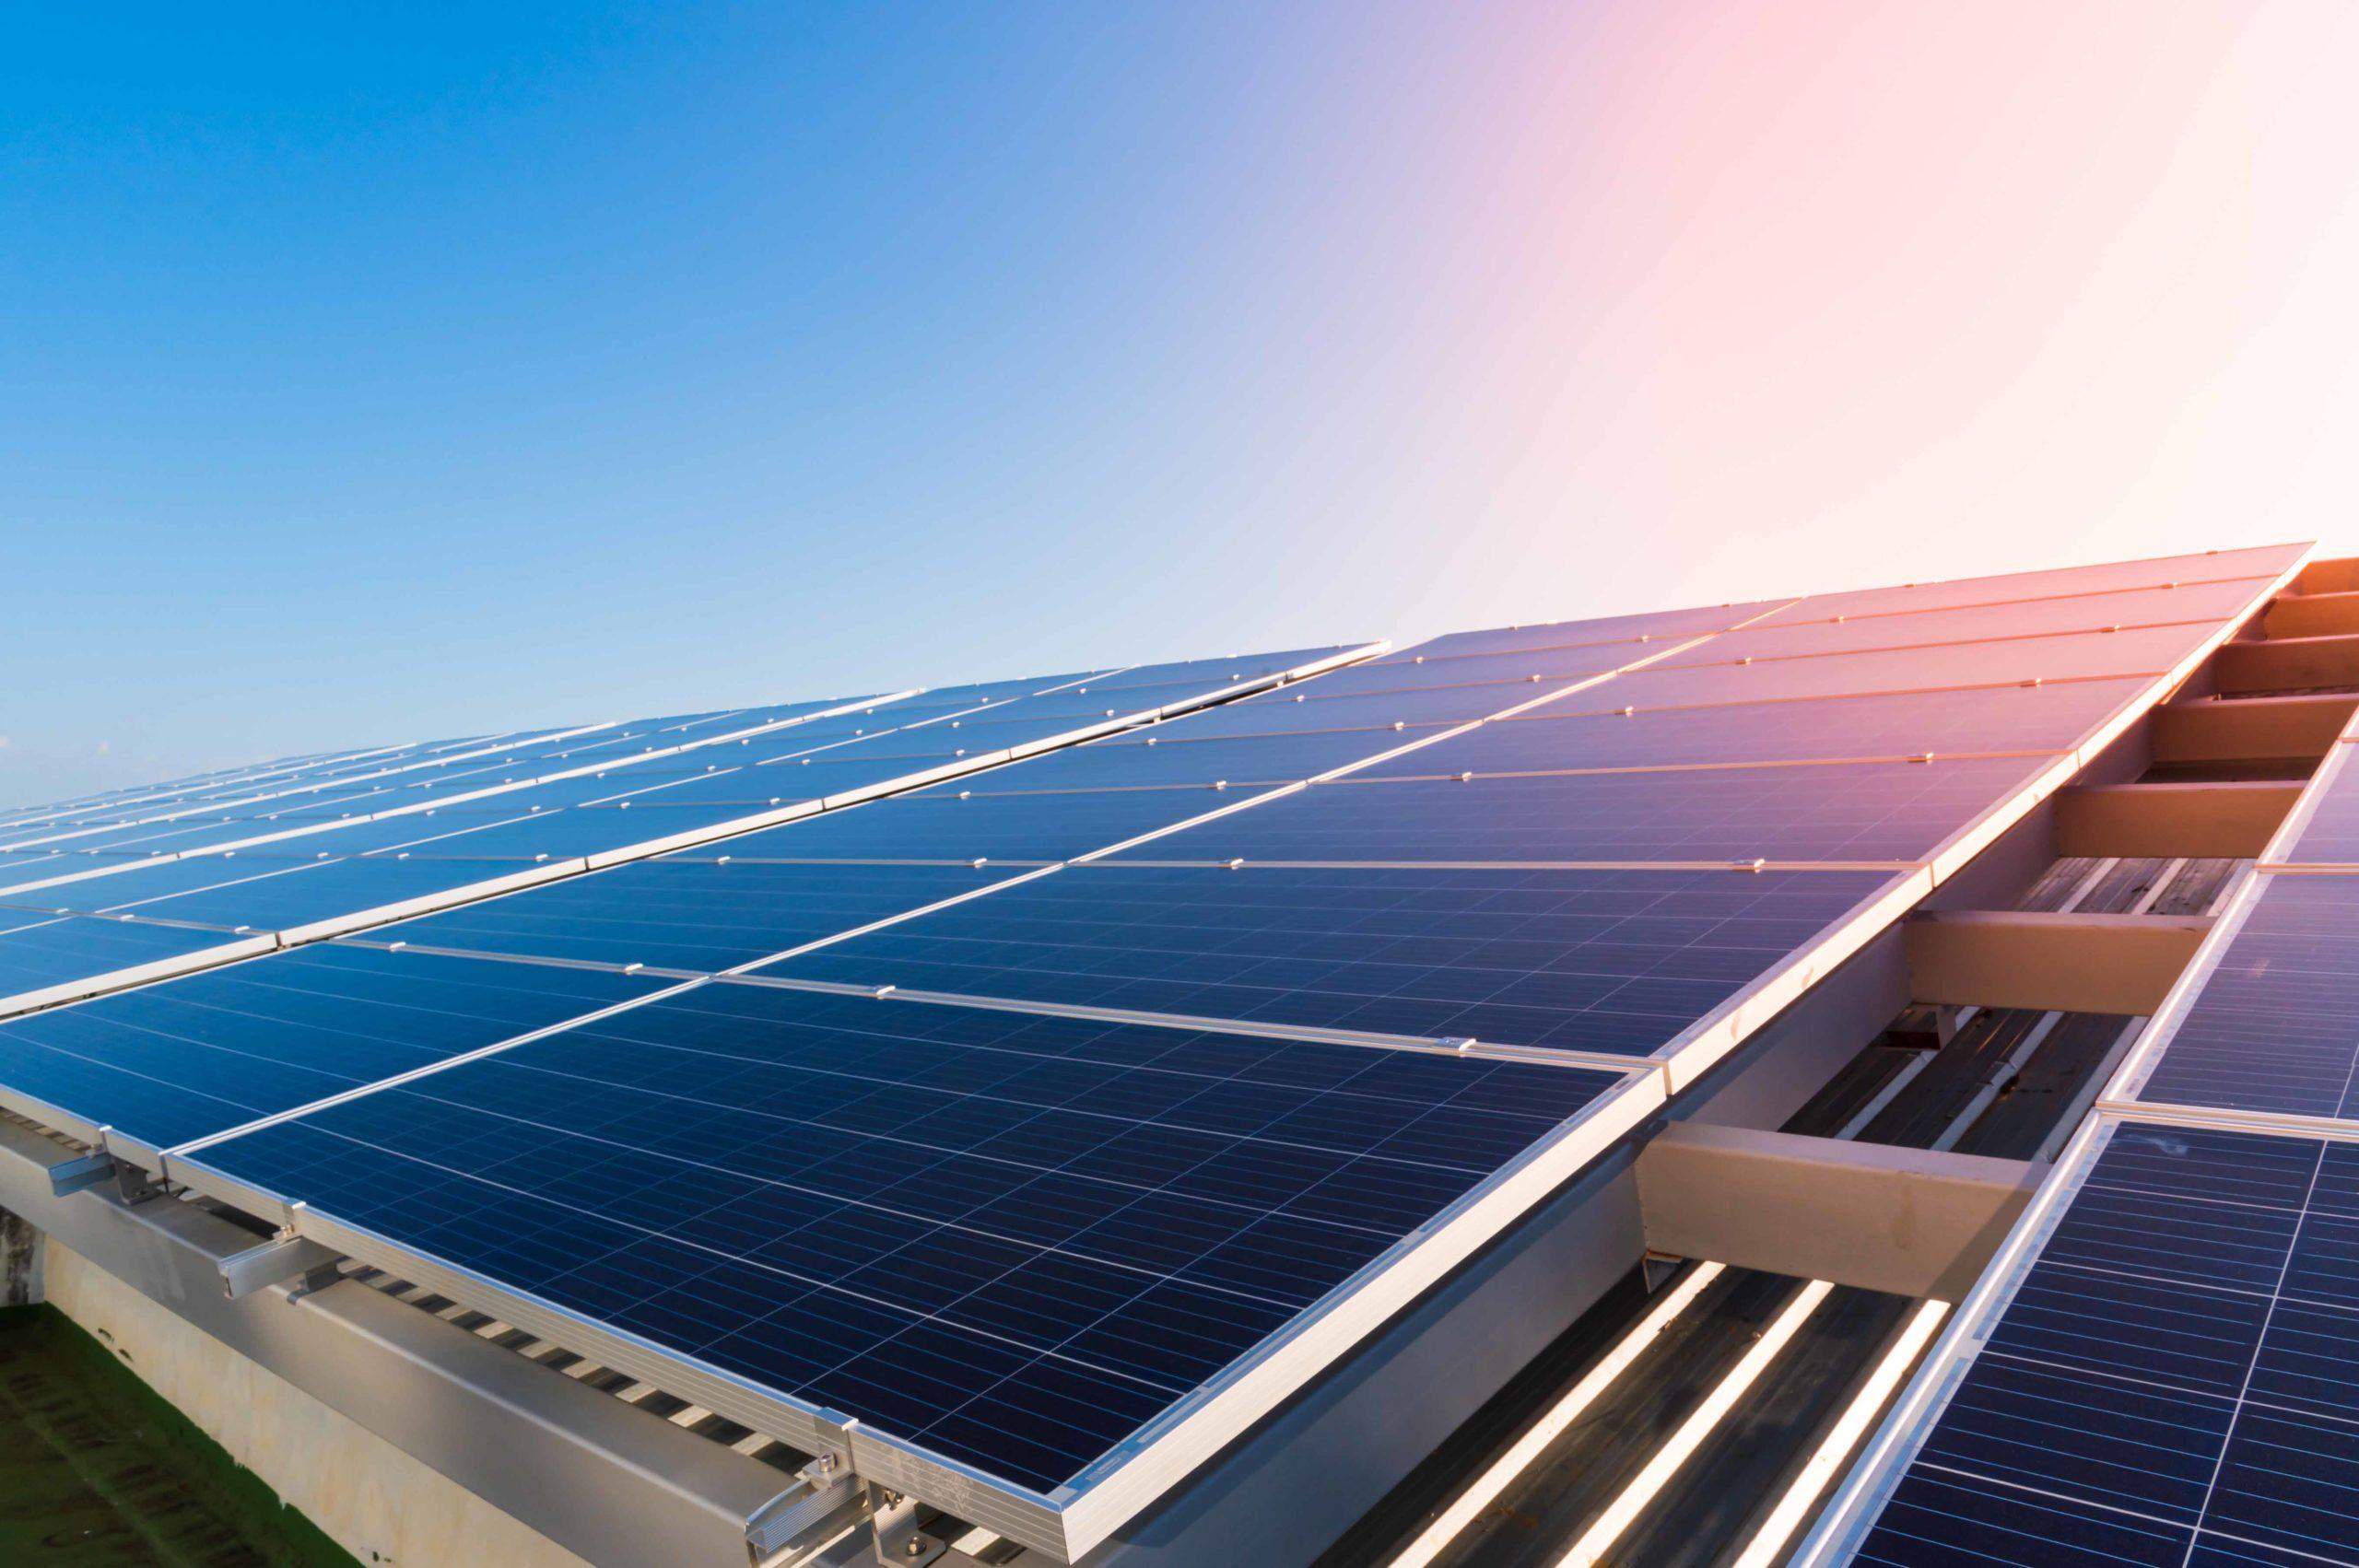 Understanding the value of the entire solar life cycle by recycling solar panels, giving modules a second life, and recovering valuable materials.